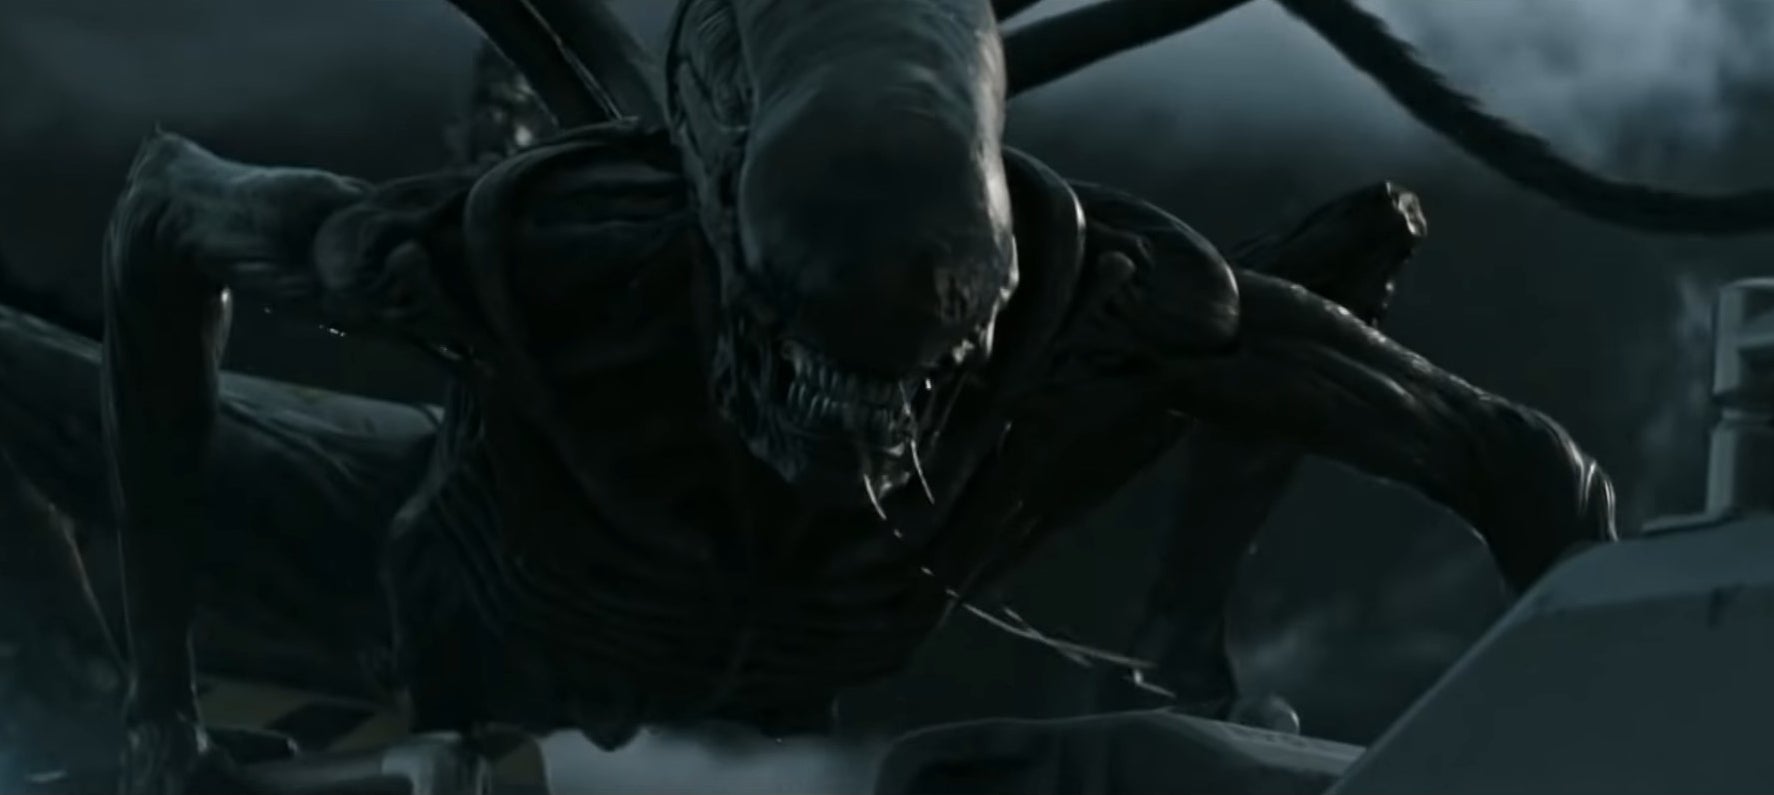 A Xenomorph hissing on top of a space craft in &quot;Alien: Covenant&quot;